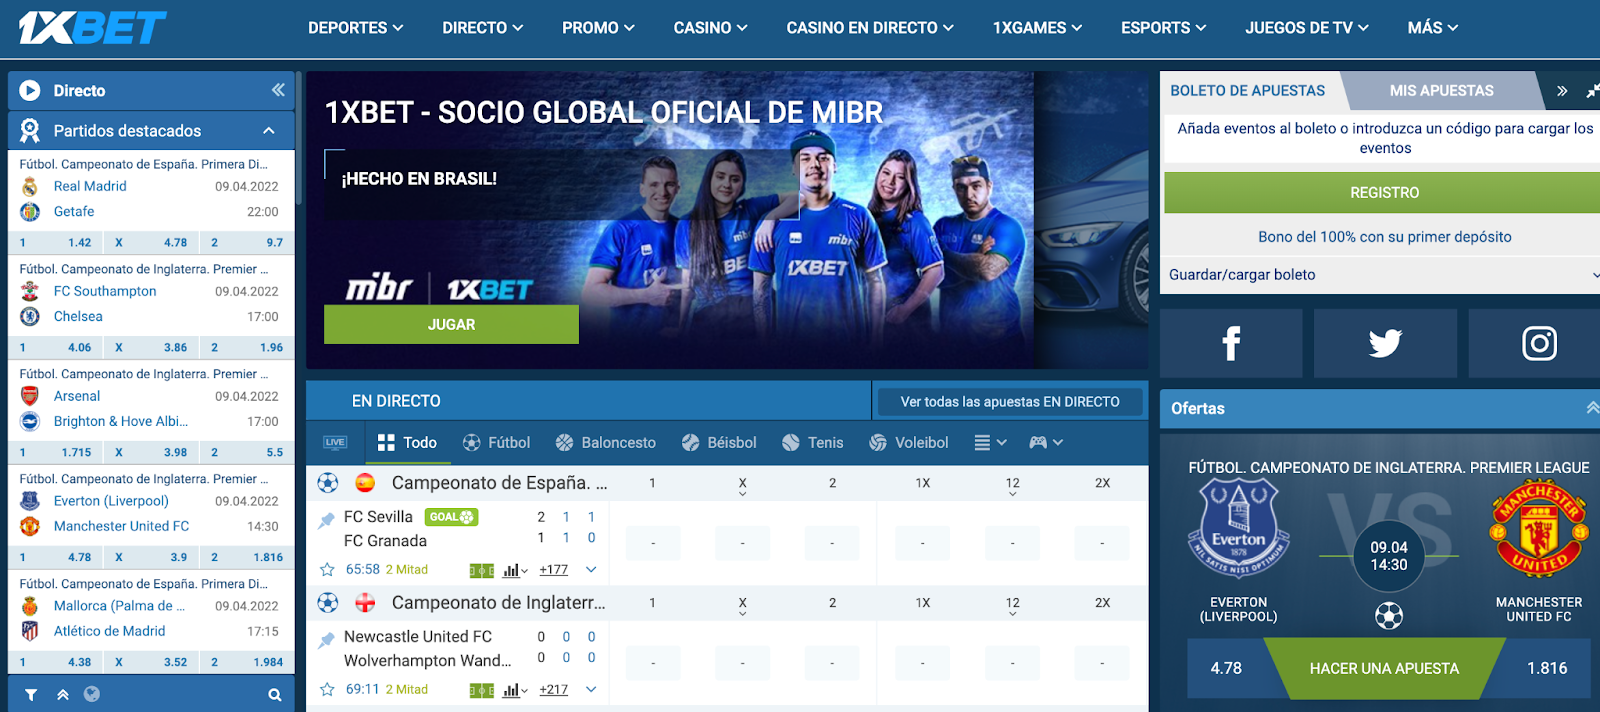 Image of 1xbet Mexico homepage showing deposits, promo among other features